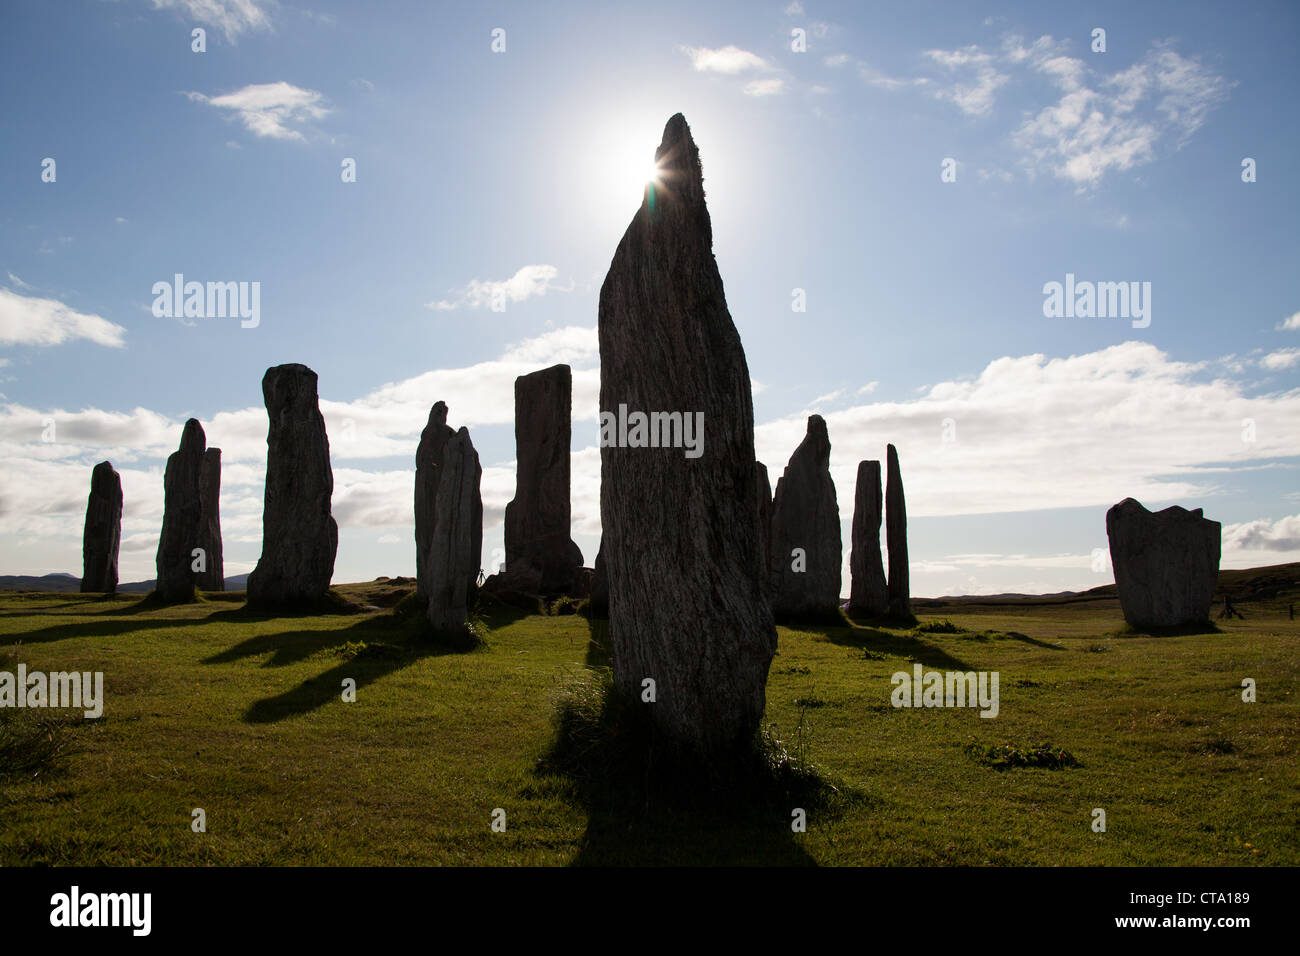 Isle of Lewis, Scotland. The Calanais Standing Stones on the west coast of Lewis near the village of Calanais. Stock Photo